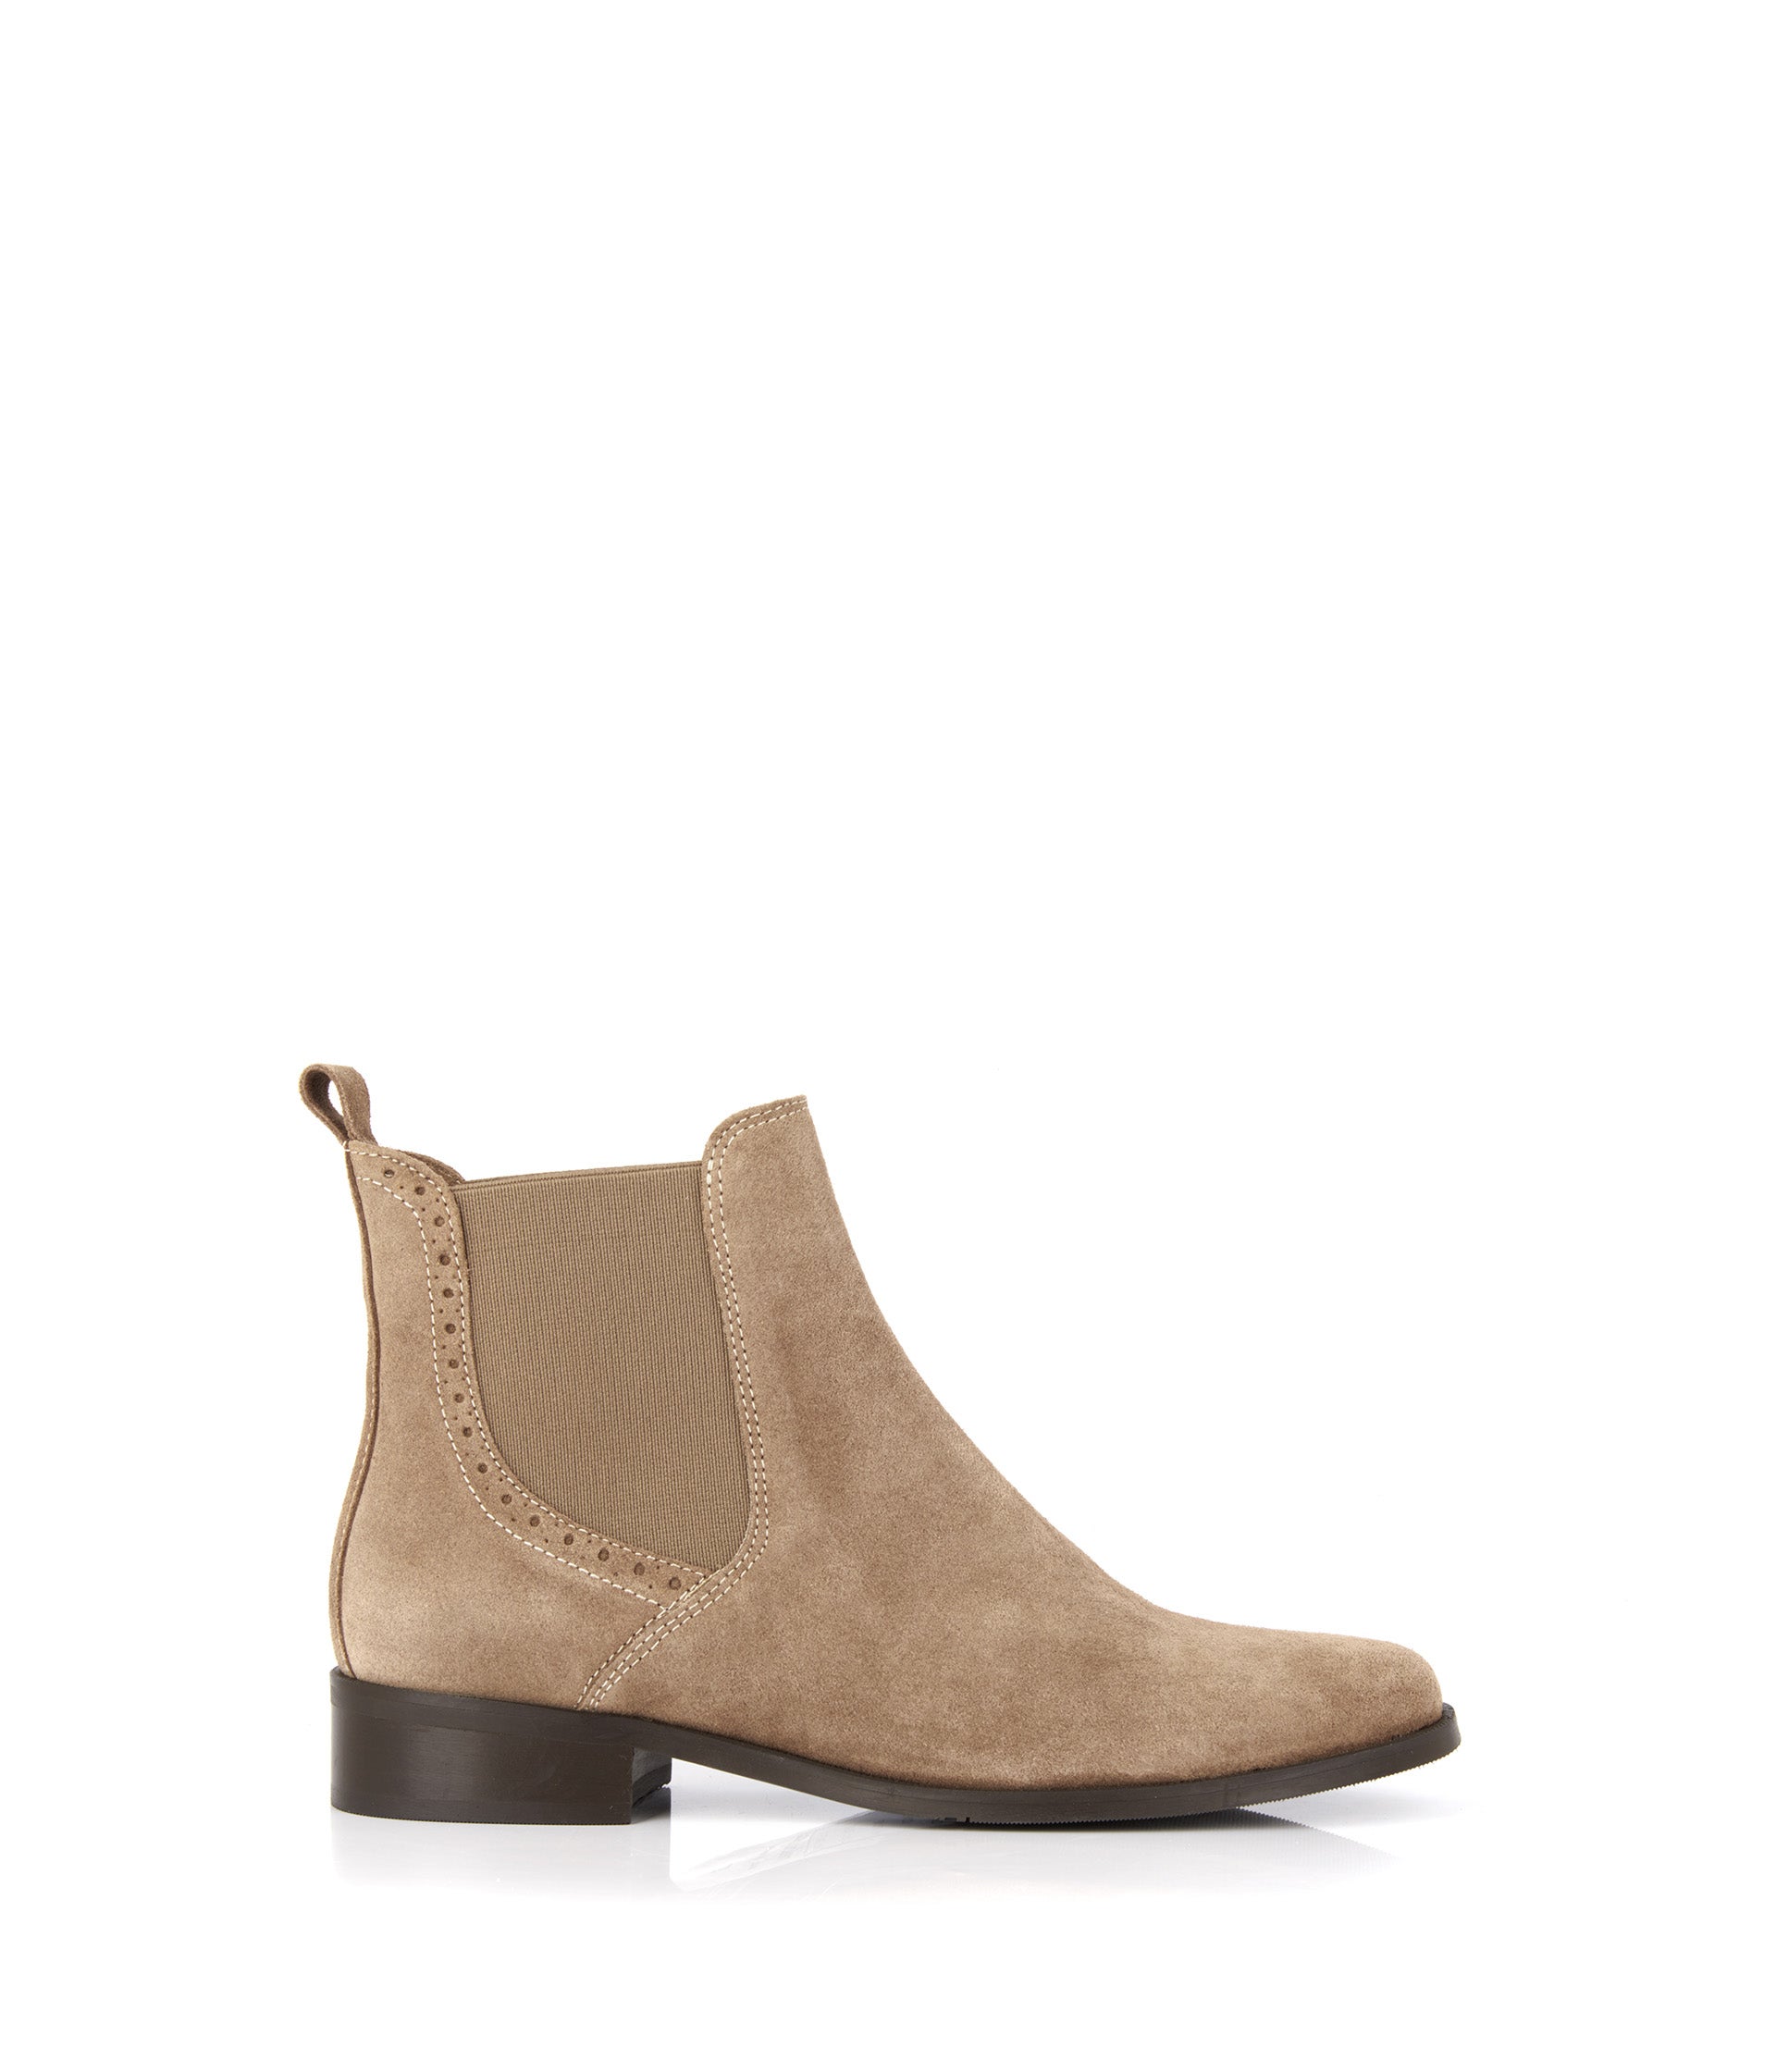 BOOTS PRUNE TAUPE